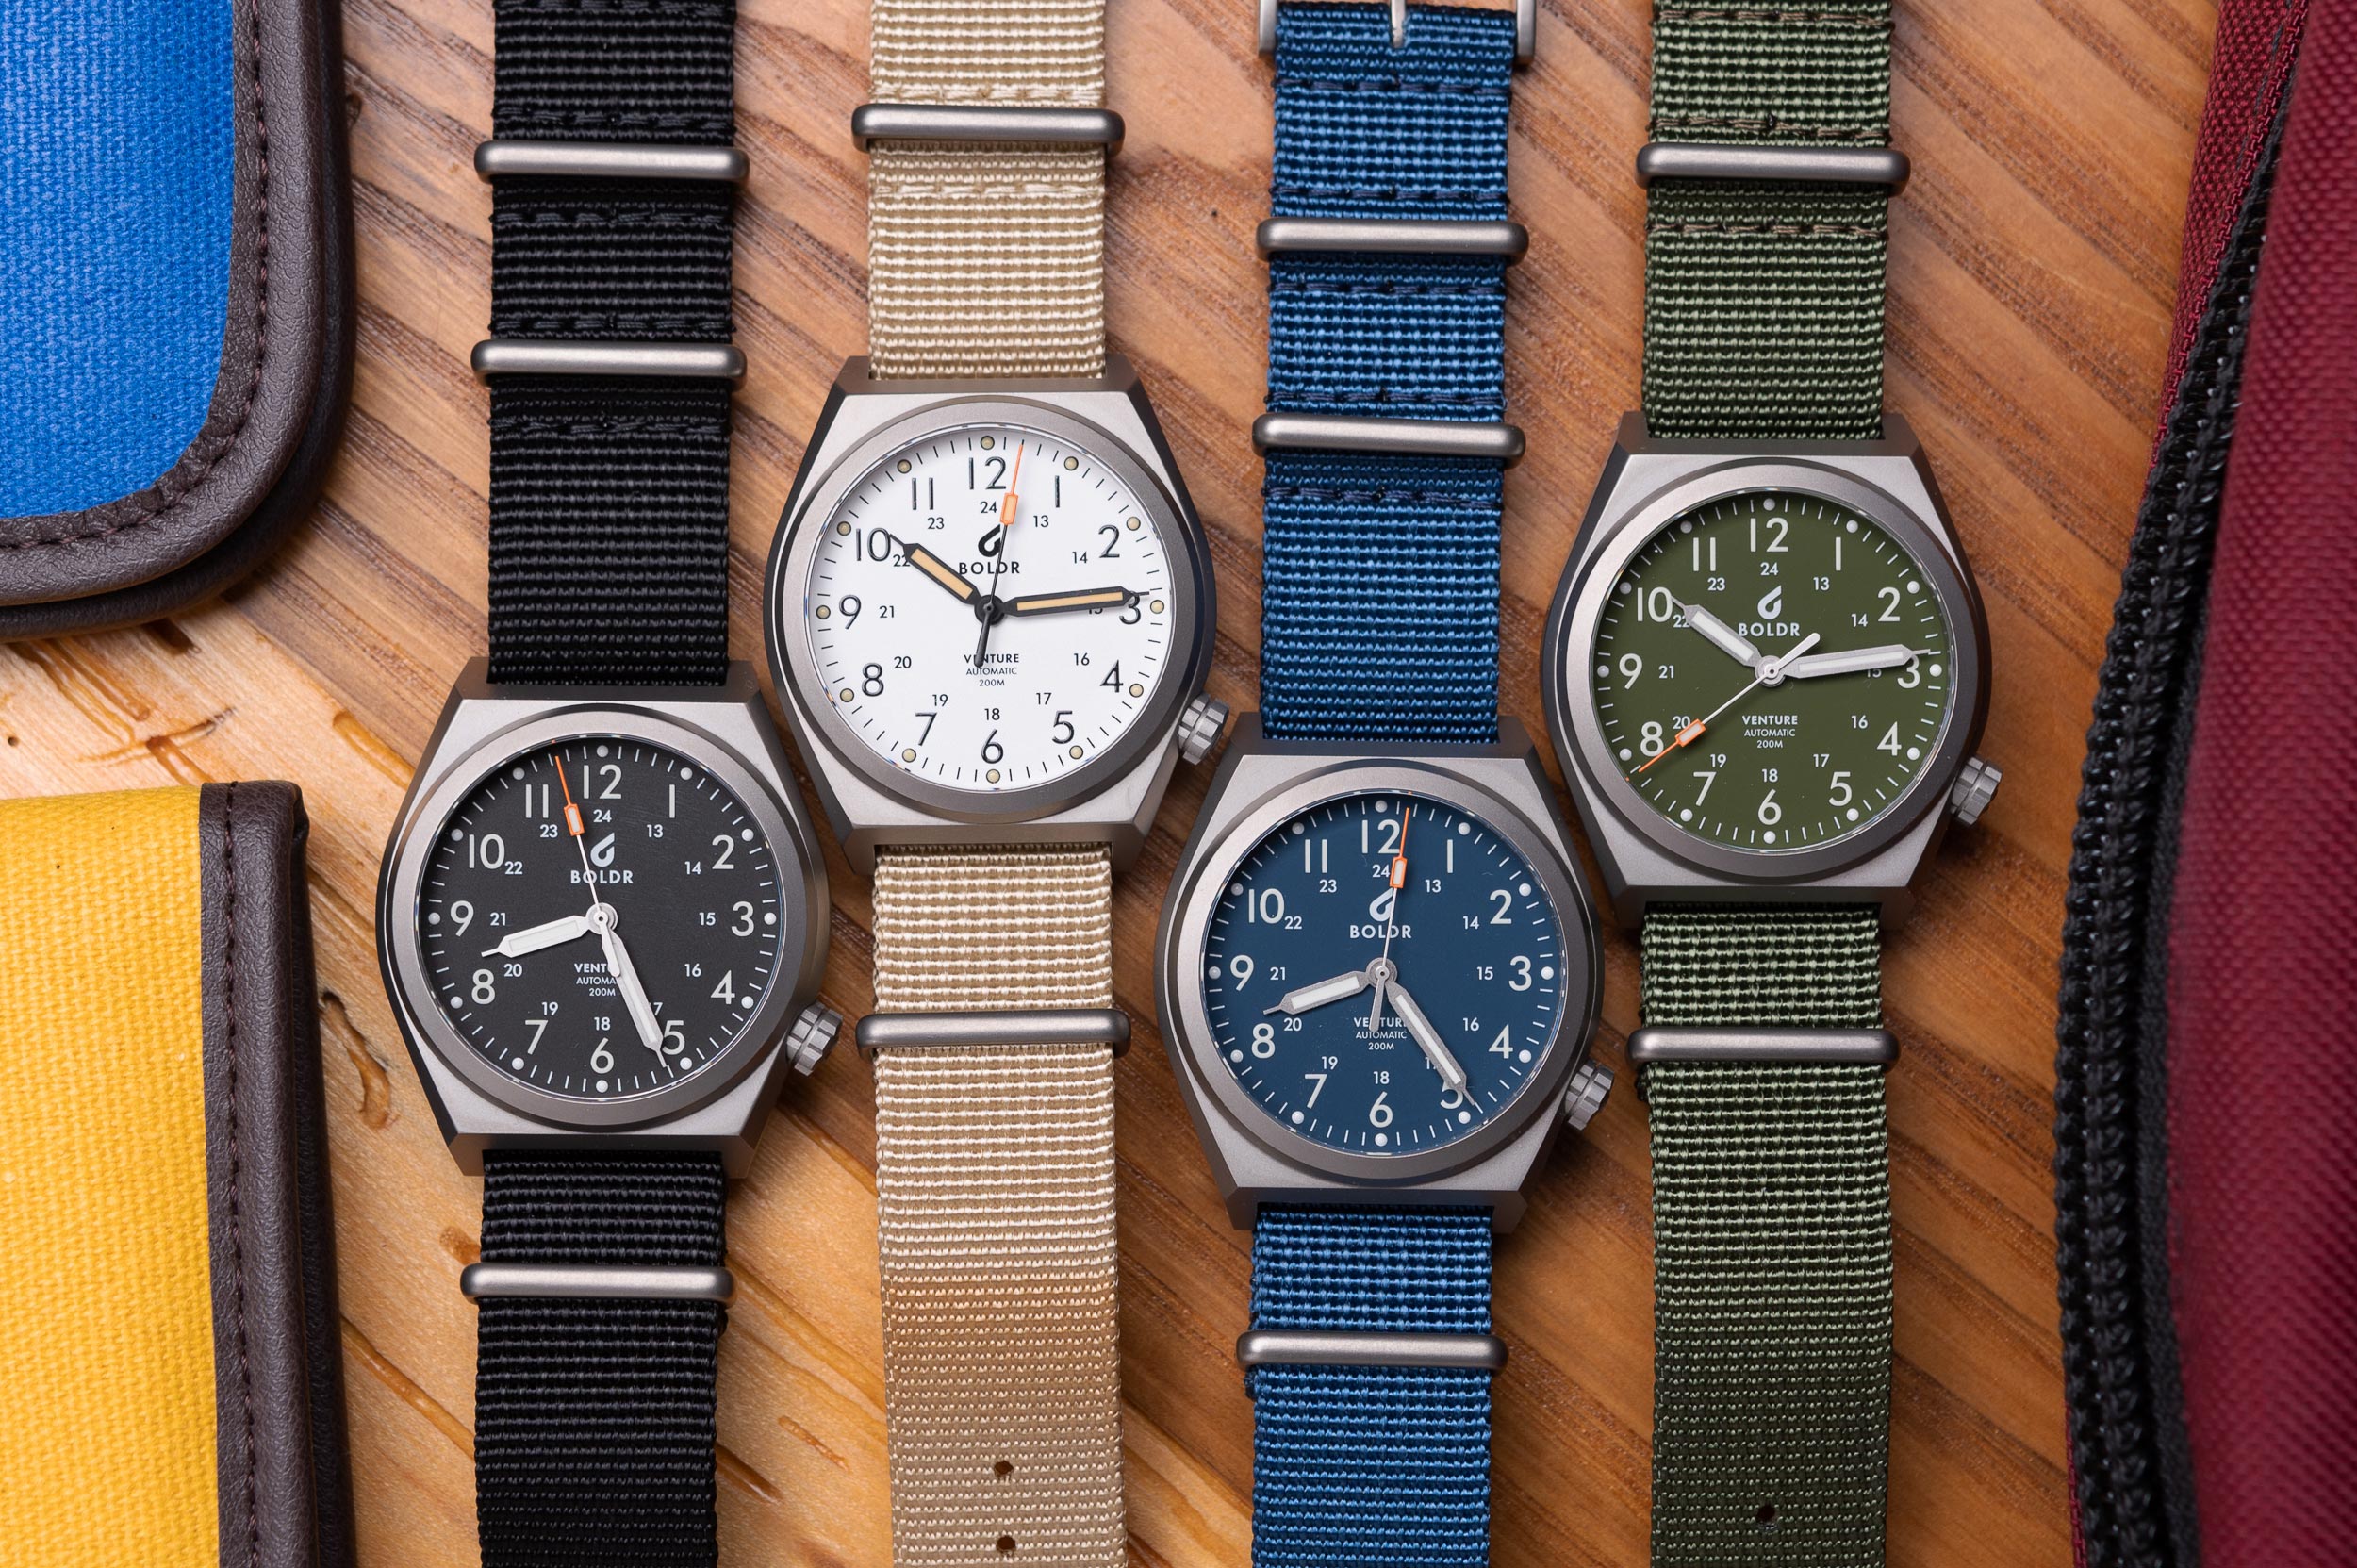 Now Available - BOLDR and Their 38mm, Automatic, Titanium $299 Field W ...